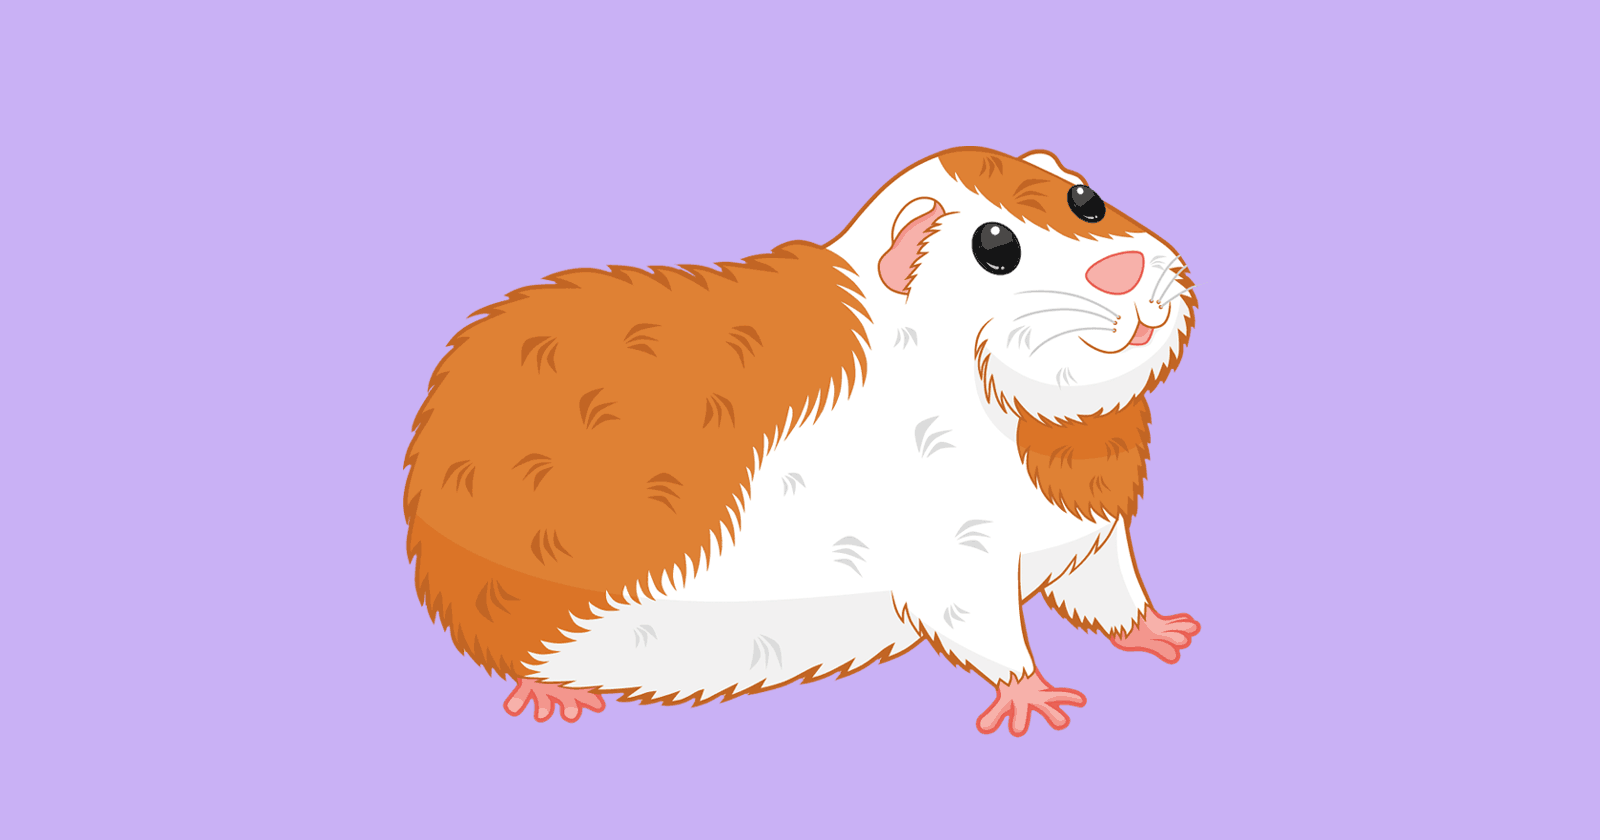 Image of a guinea pig, a metaphor for those who use the first versions of any product